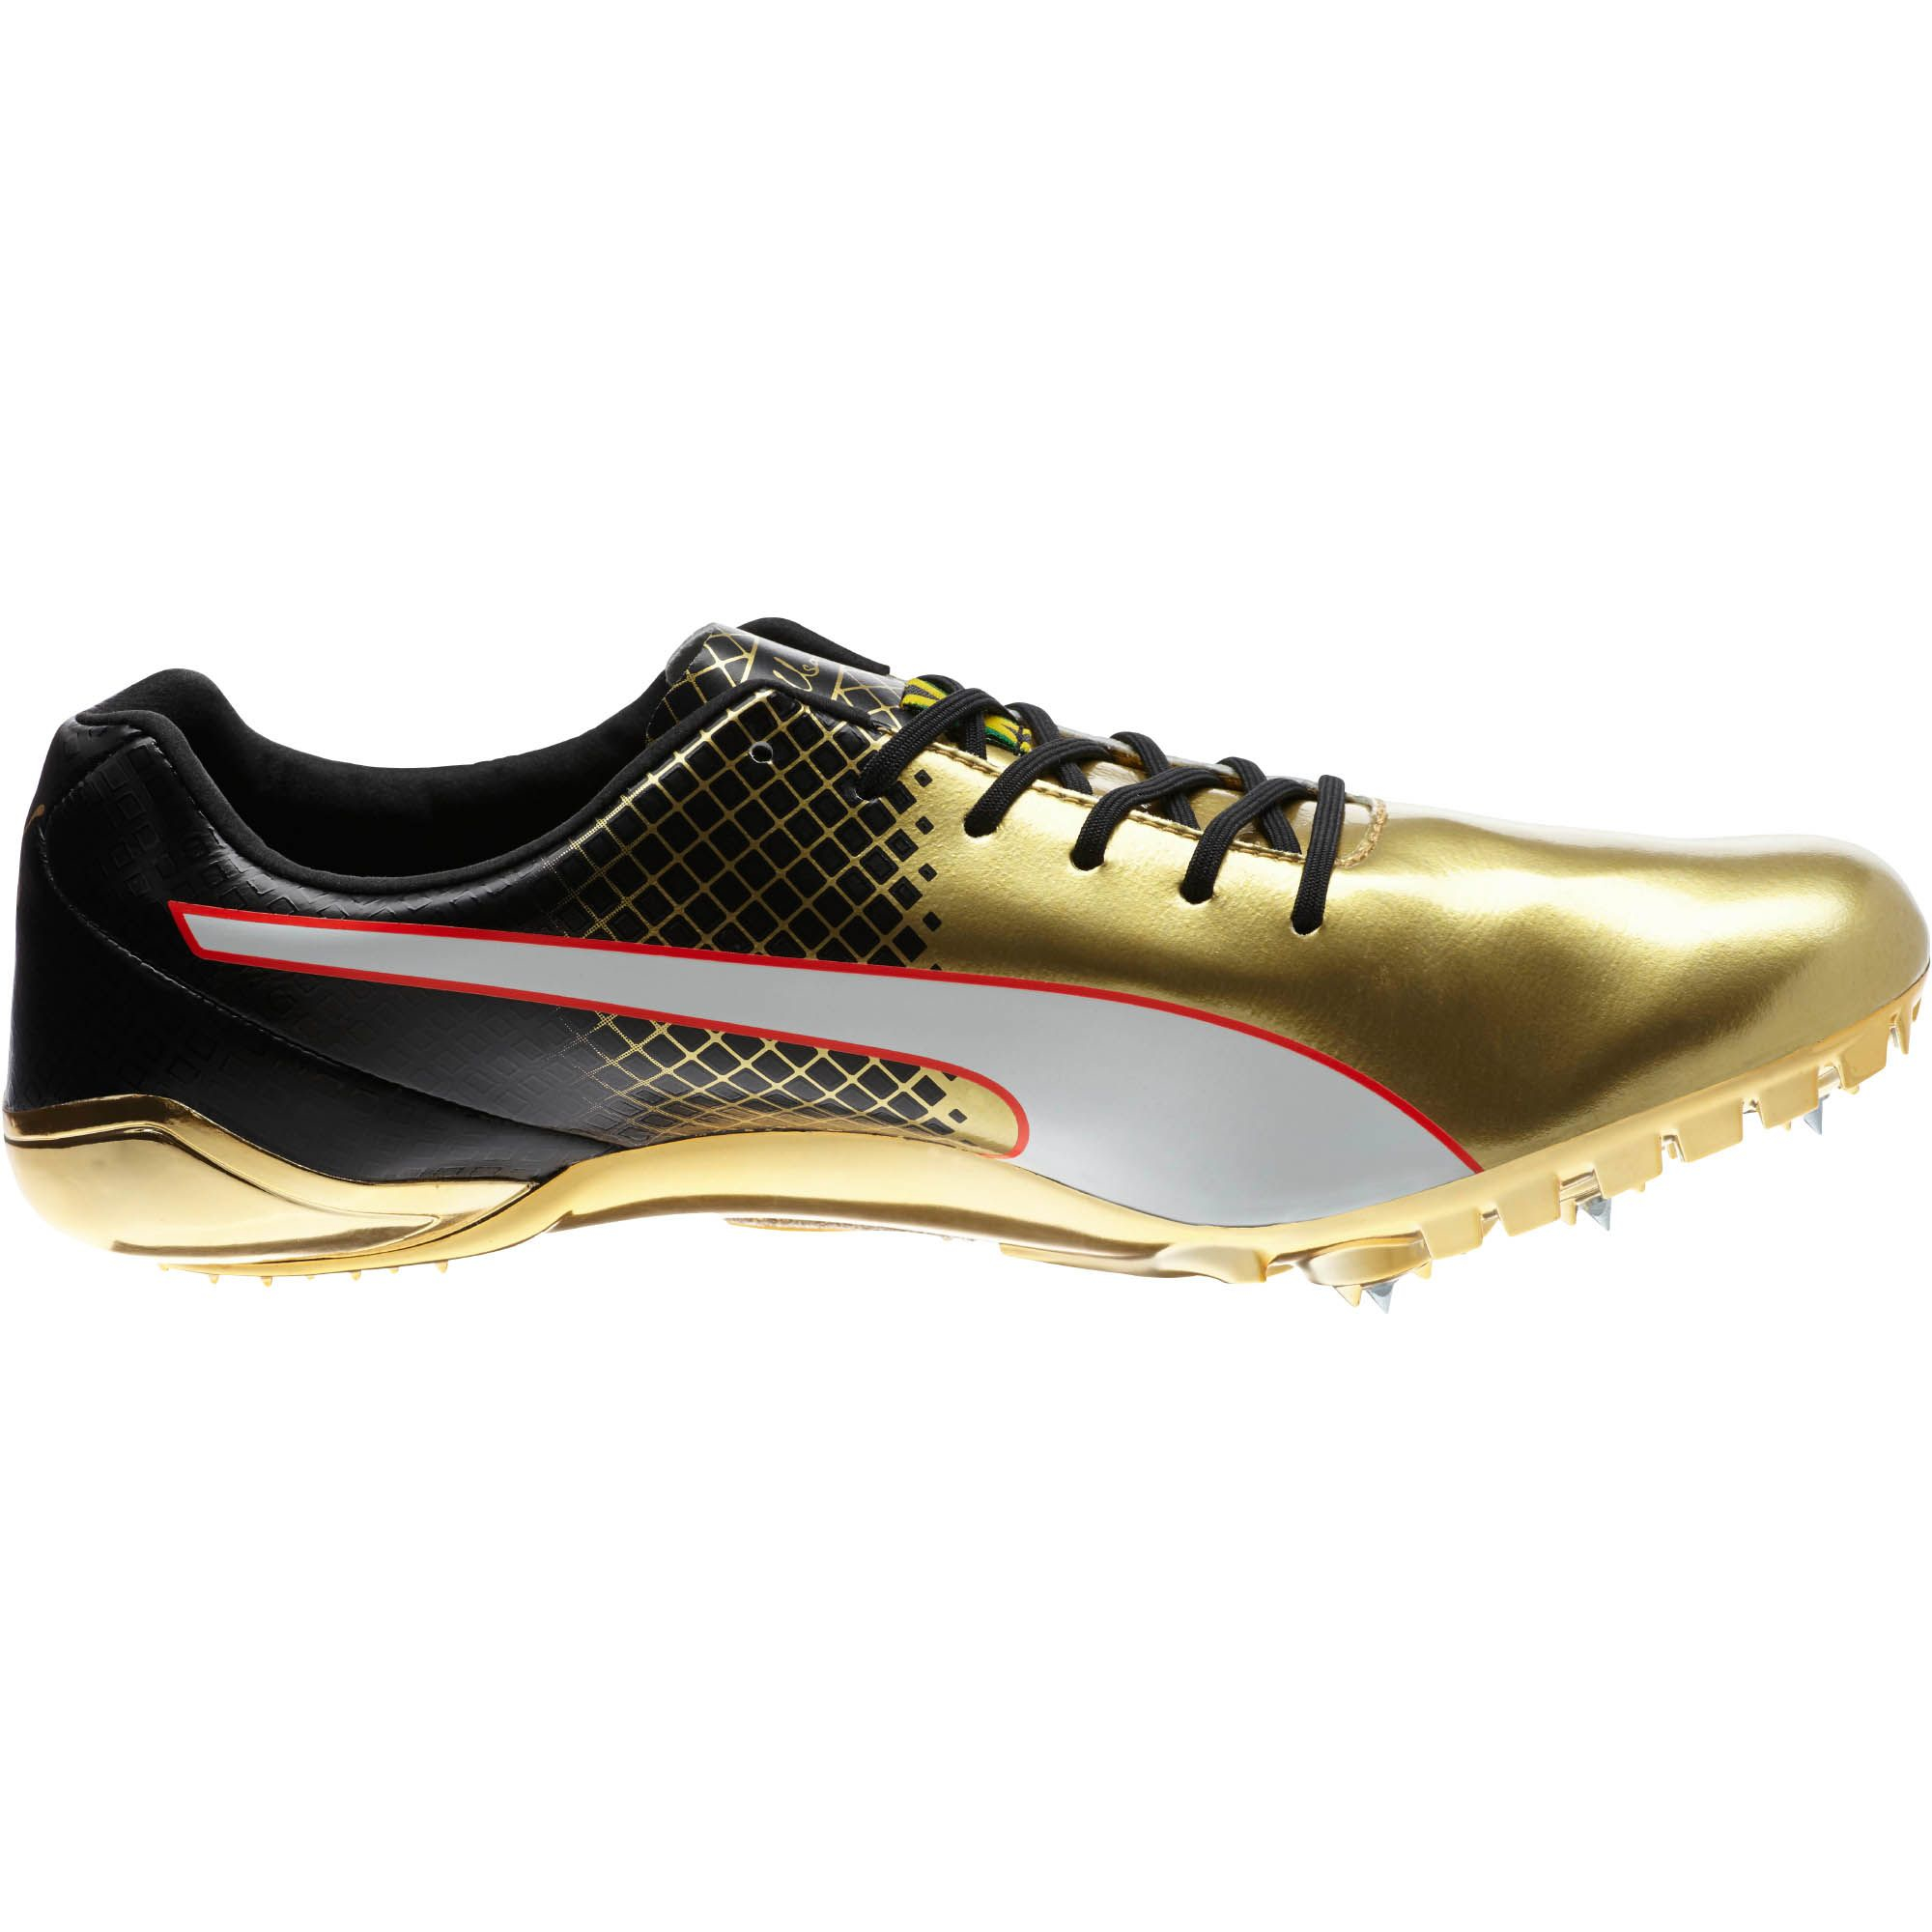 puma one8 gold spikes price